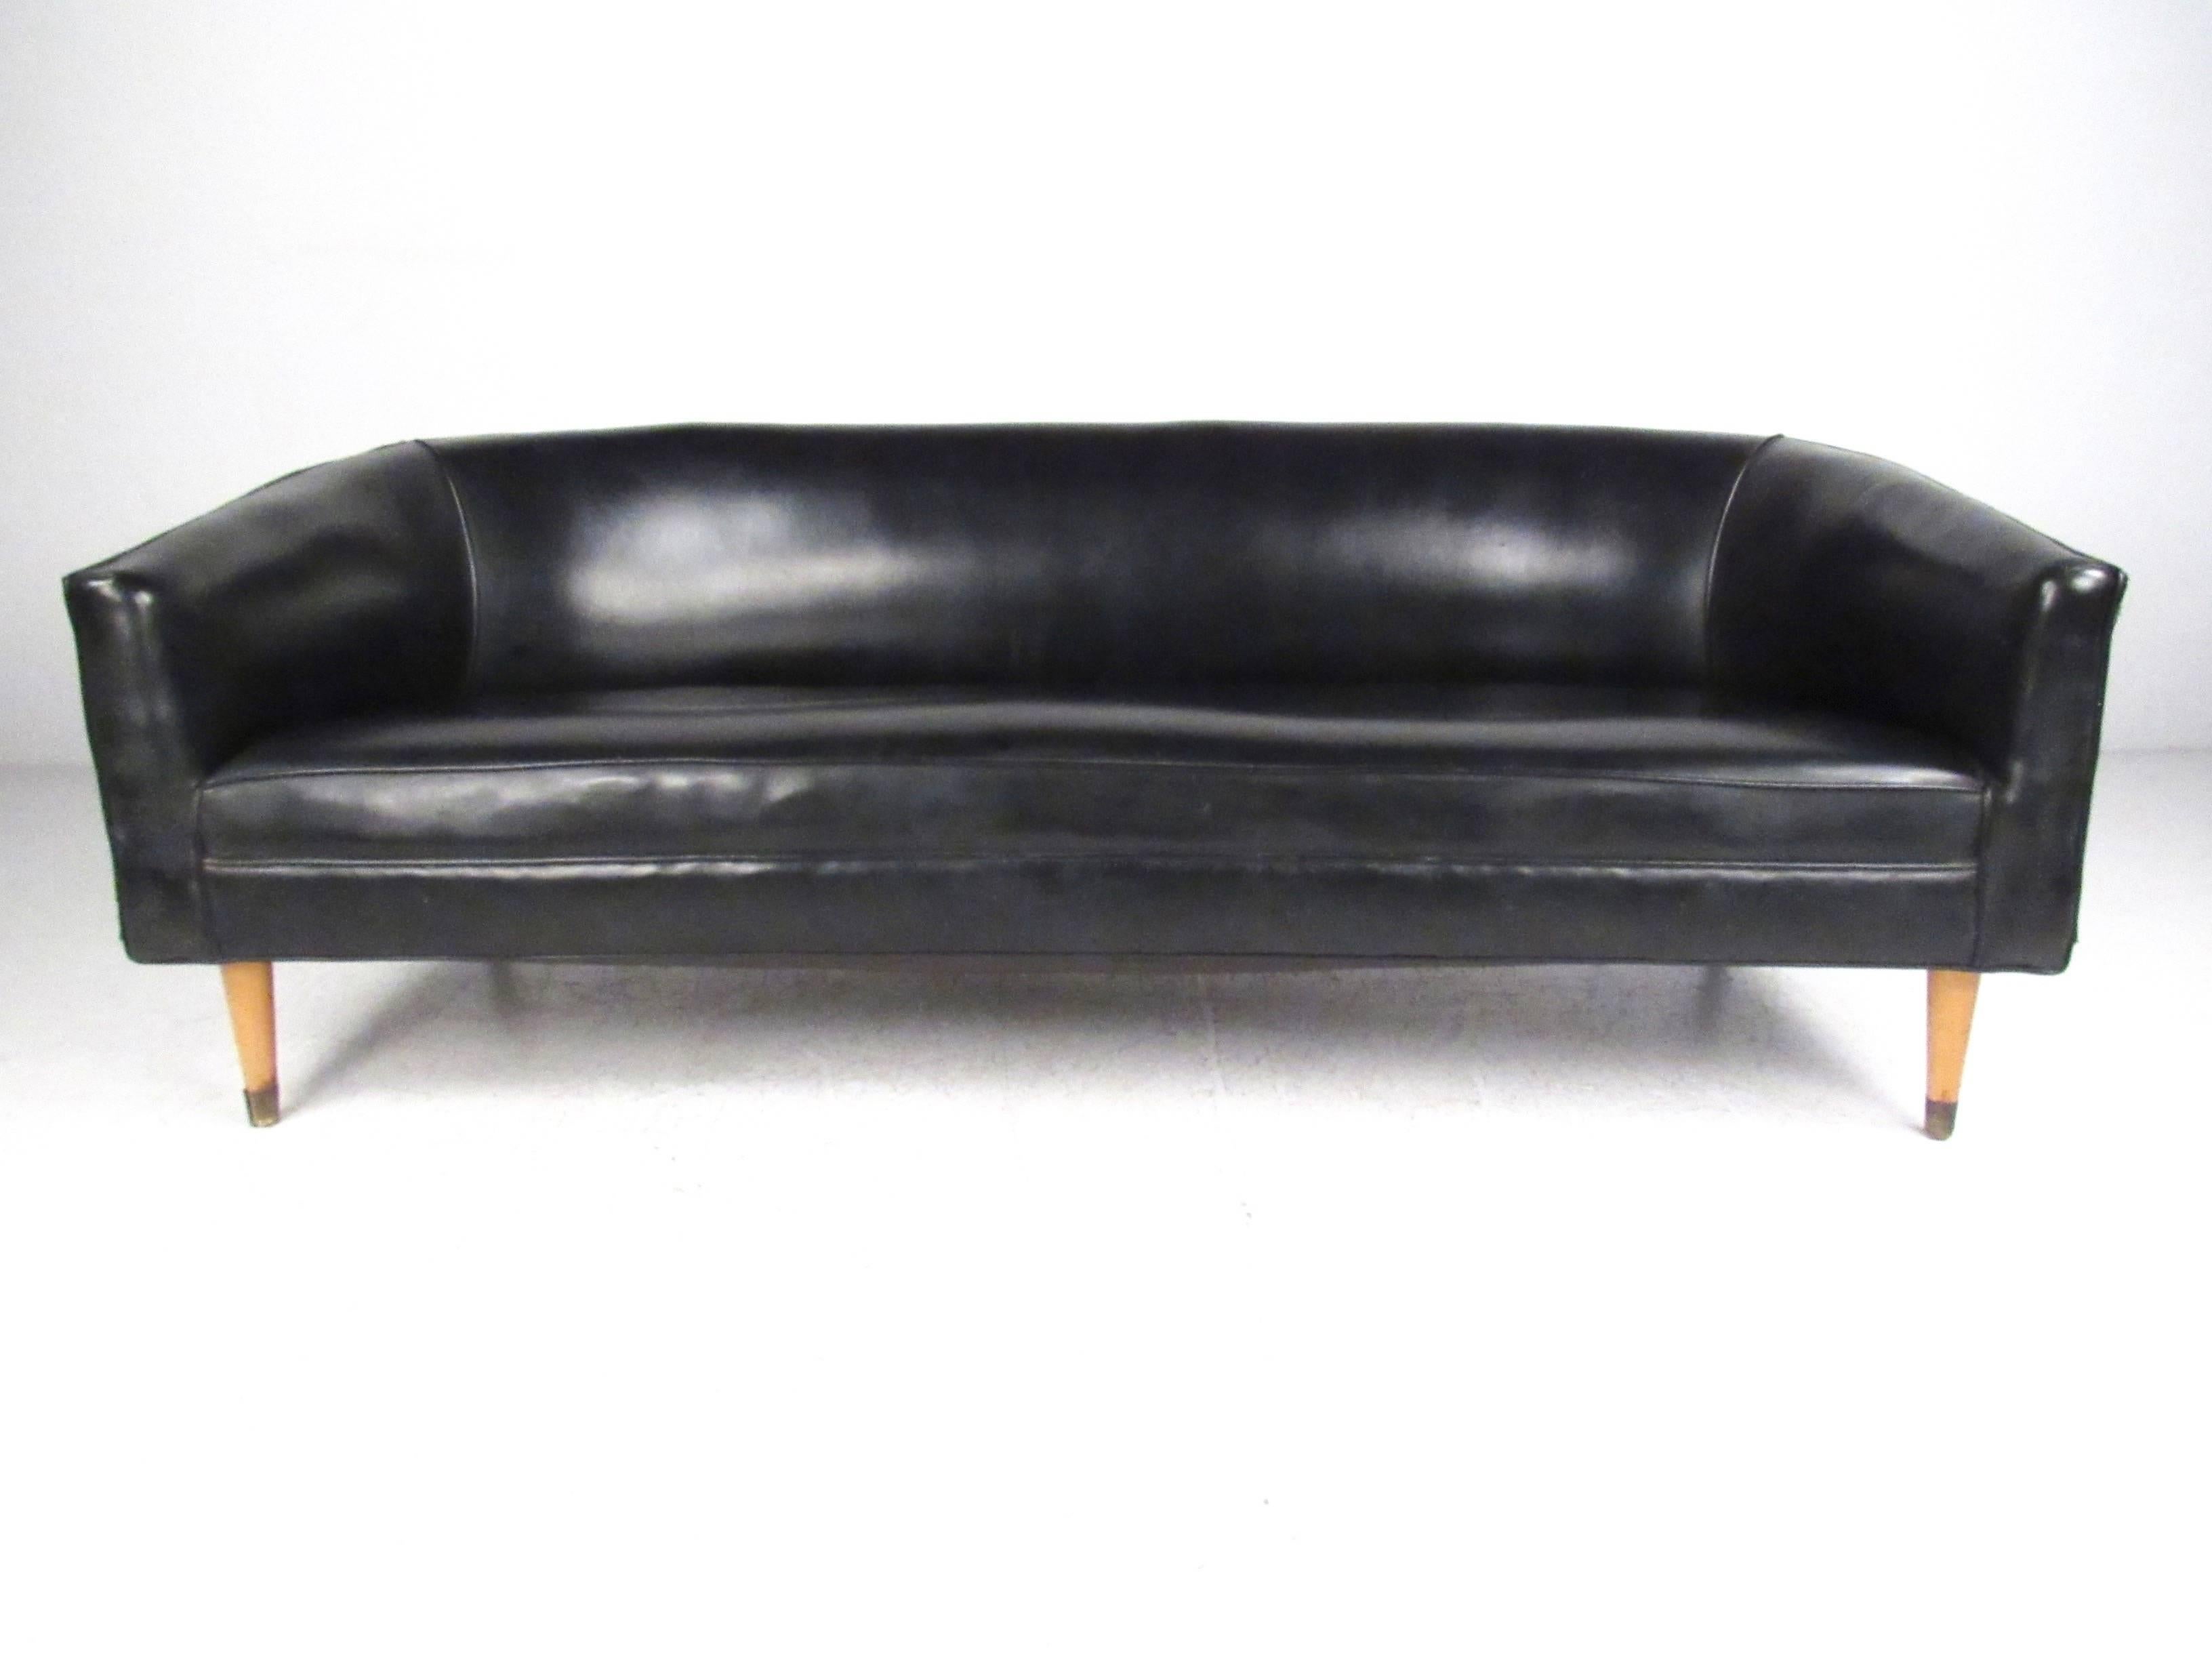 This vintage black Naugahyde sofa features a stylish sounded back design with tapered hardwood legs. Brass trim on the feet and the comfortable design of this Mid-Century piece makes this Italian sofa a stylish addition to any interior. Please